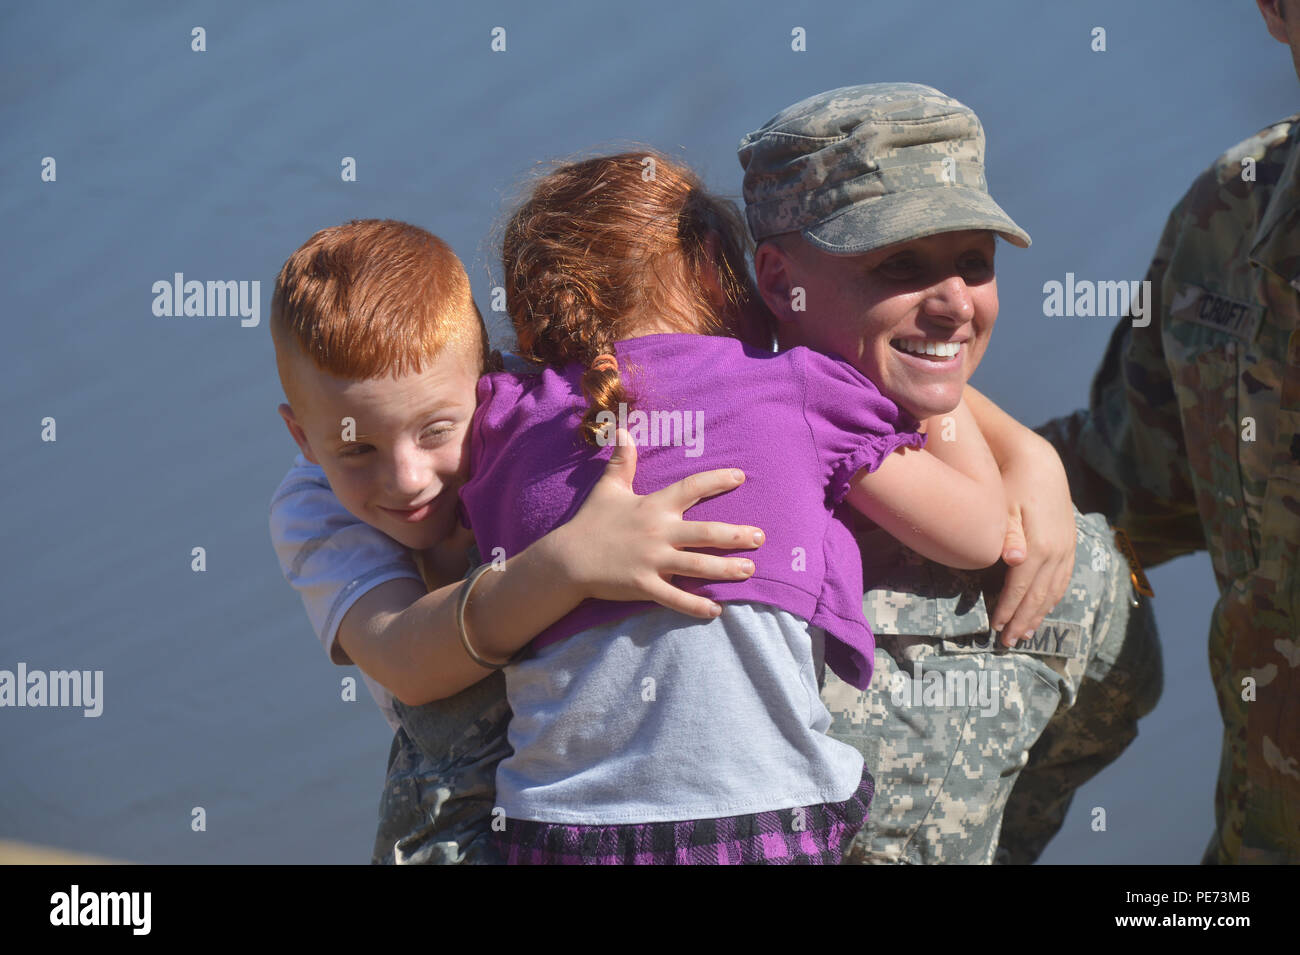 U.S. Army Maj. Lisa Jaster is congratulated by her children following graduation from Ranger School on Fort Benning, Ga., Oct. 16, 2015. Jaster is the third female to graduate Ranger School. (U.S. Army photo by Staff Sgt. Alex Manne/ Released) Stock Photo